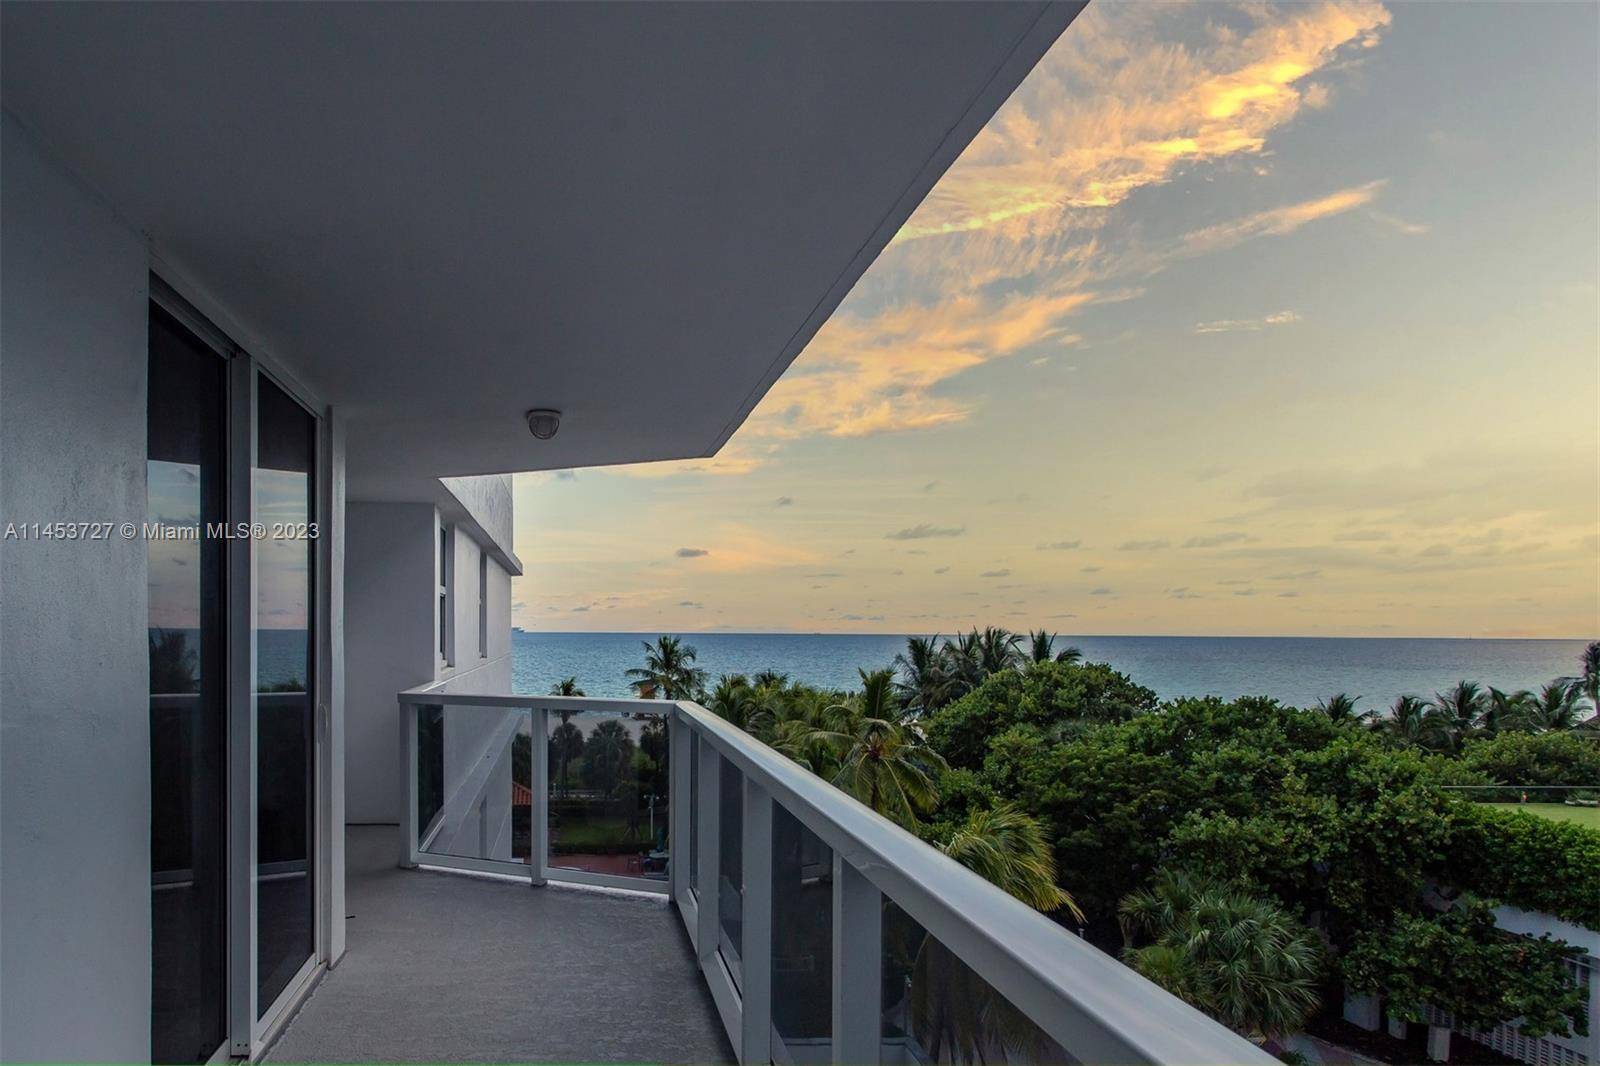 Spacious 2 Bed 2 Bath Beachfront Condo in the BEST location of Miami Beach with views of the ocean from your large balcony.